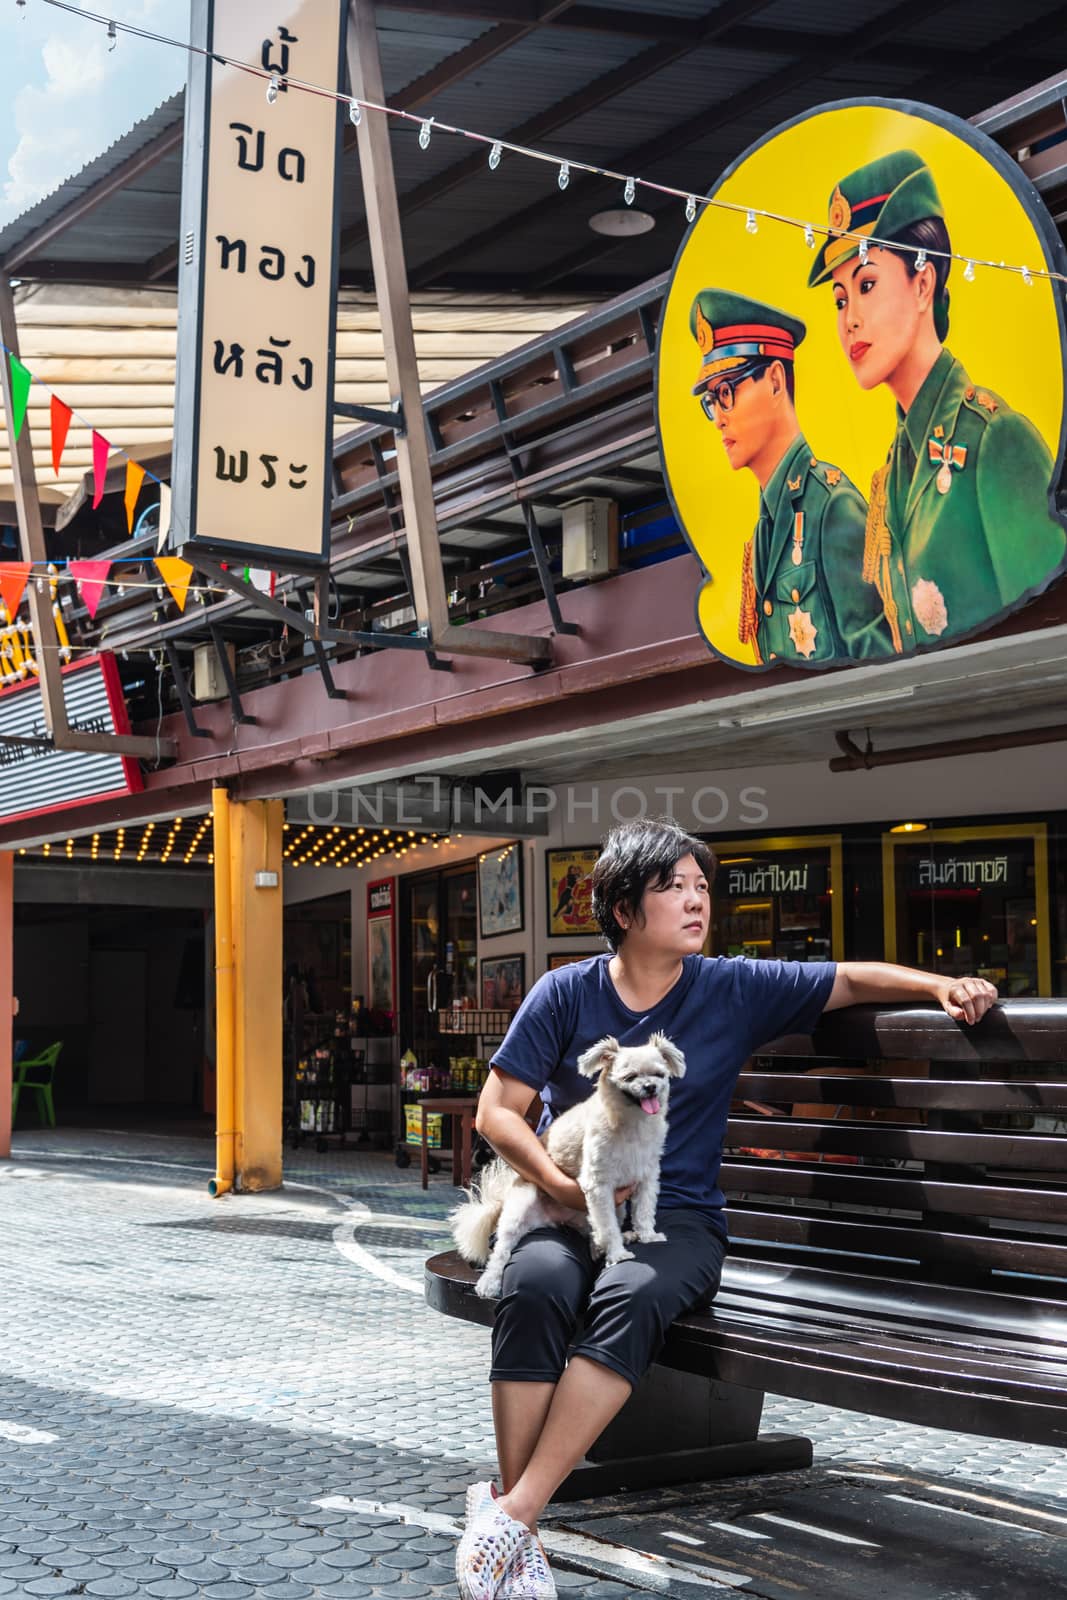 Prachuap Khiri Khan, Thailand - June 18, 2017 : Asian and her dog travel at Mercado de Plearnwan is tourist attraction in Hua Hin recreated retro village plus charming colorful accommodations.